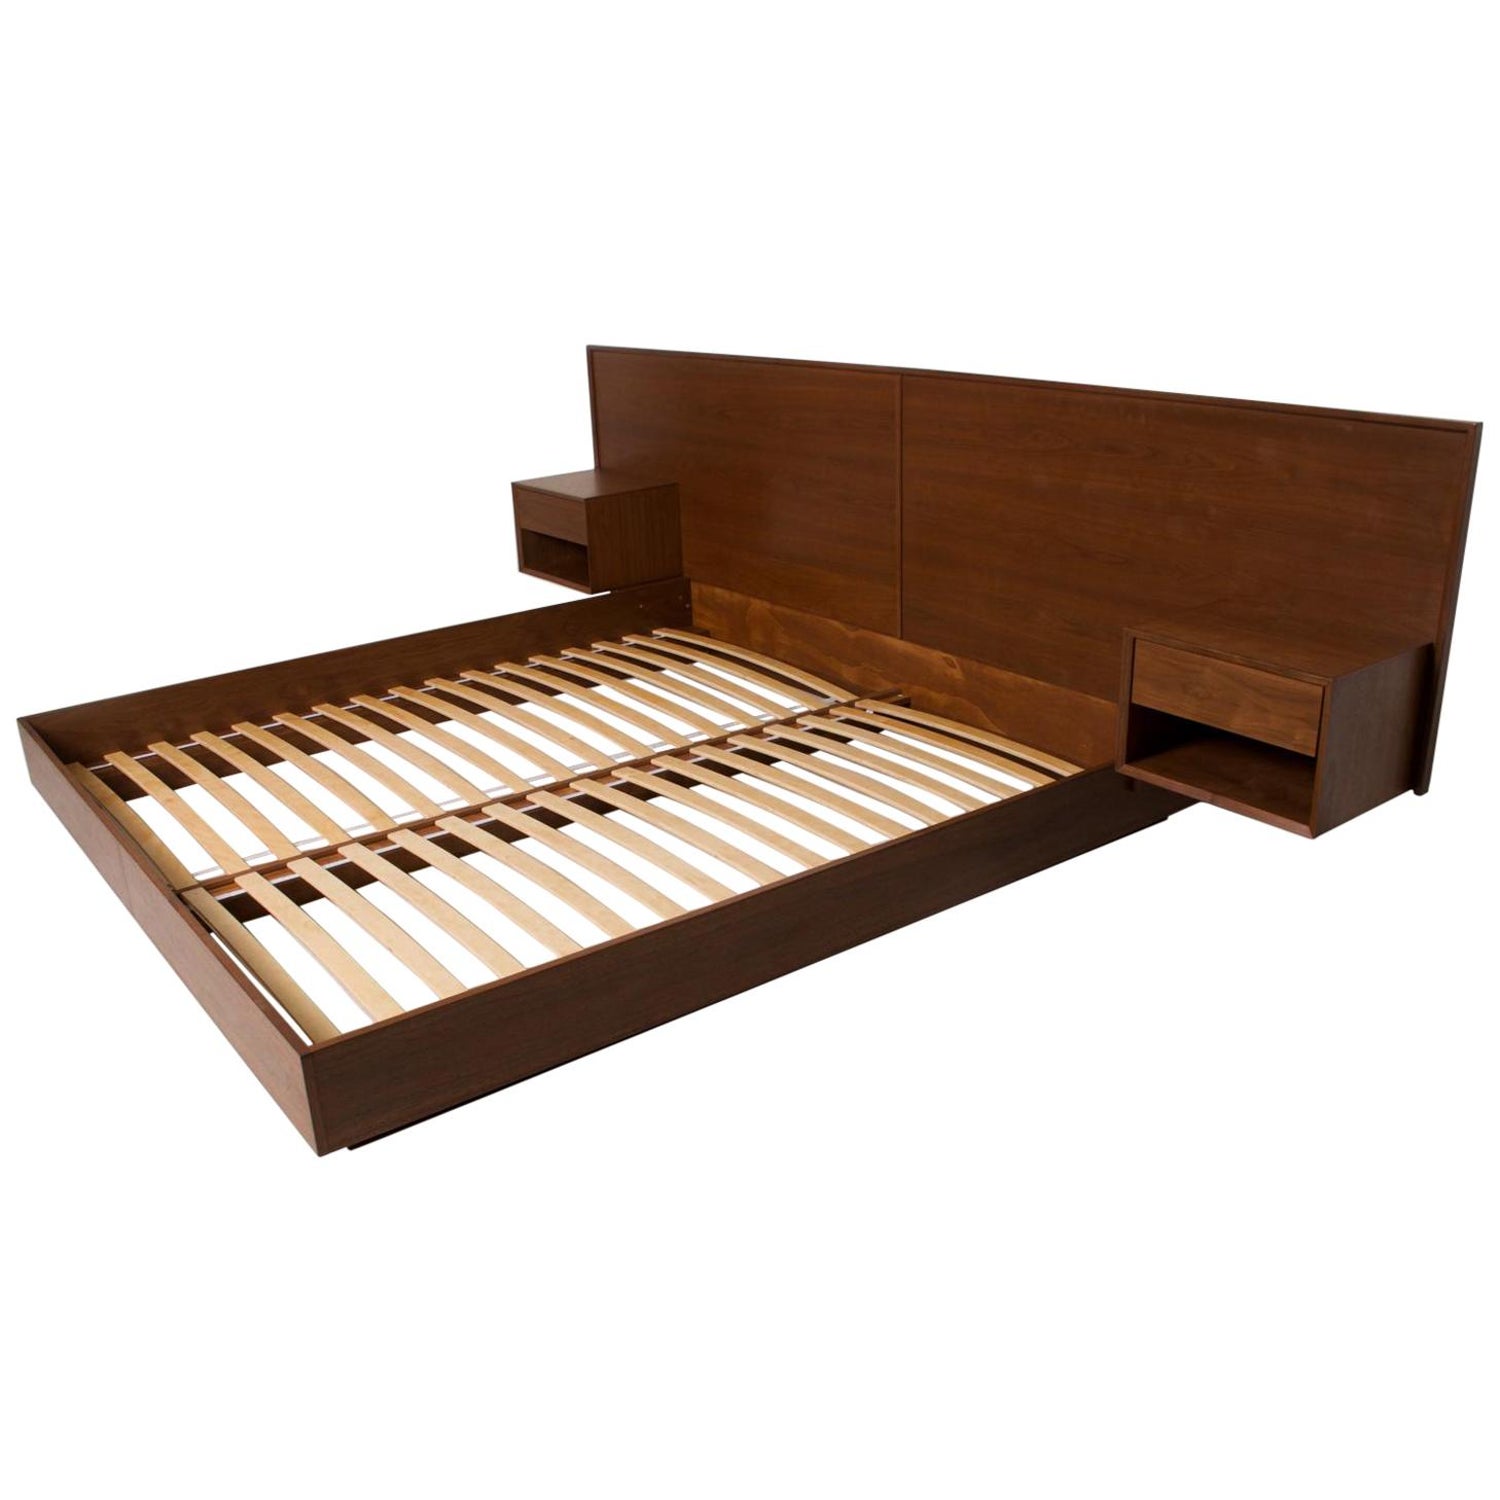 Platform Bed With Floating Nightstands, Contemporary King Bed Frame